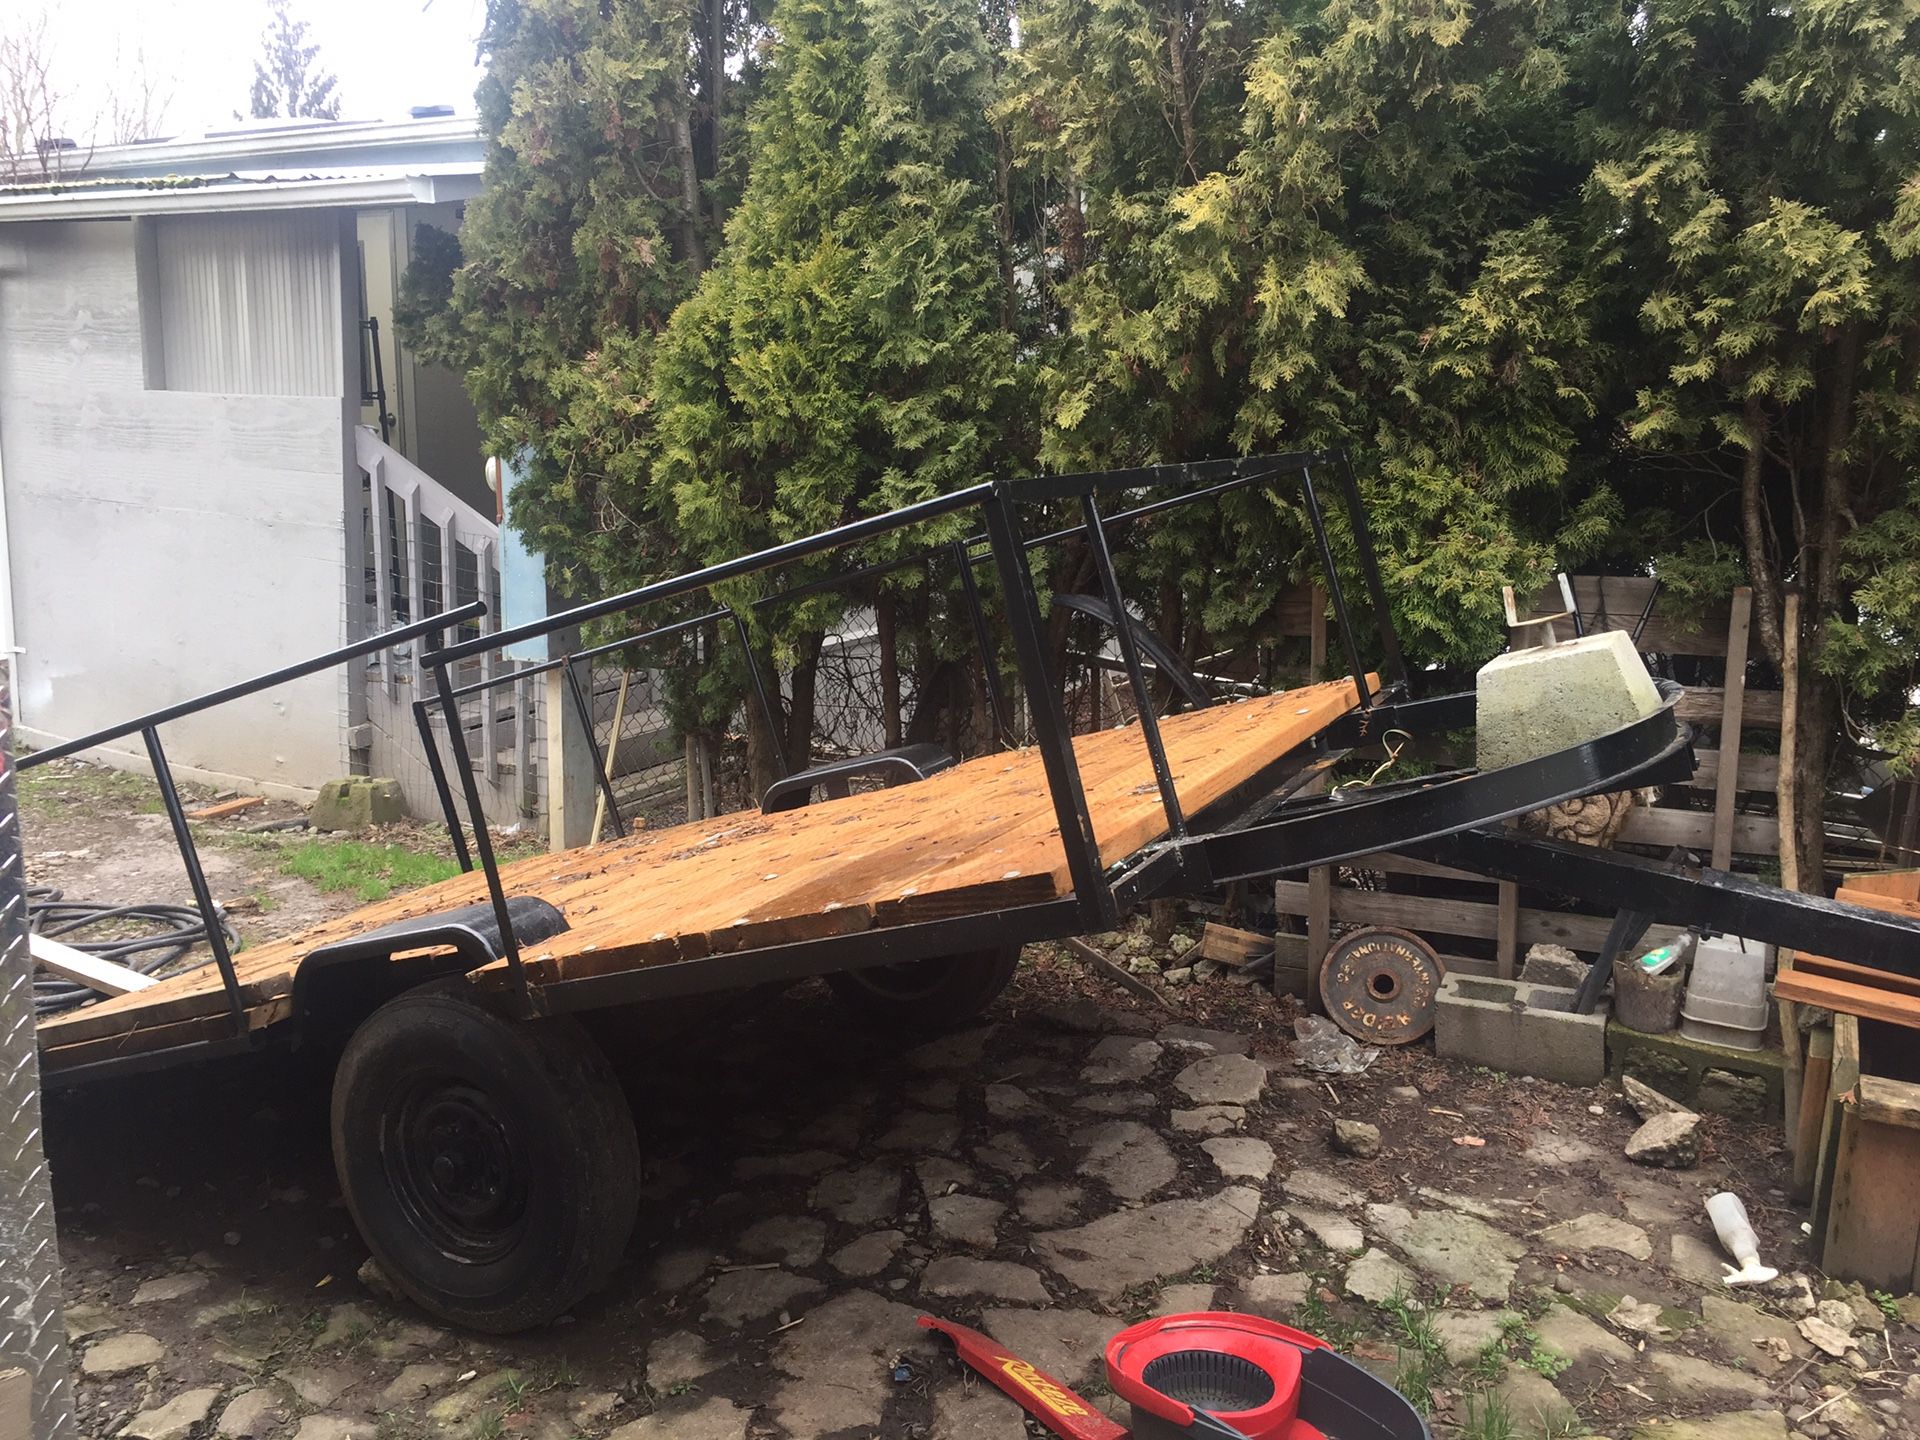 10’x6’ UTILITY TRAILER NEVER USE FRESH PAINT ,PRESSURE TREATED BOARDS ,HITCH , JACK